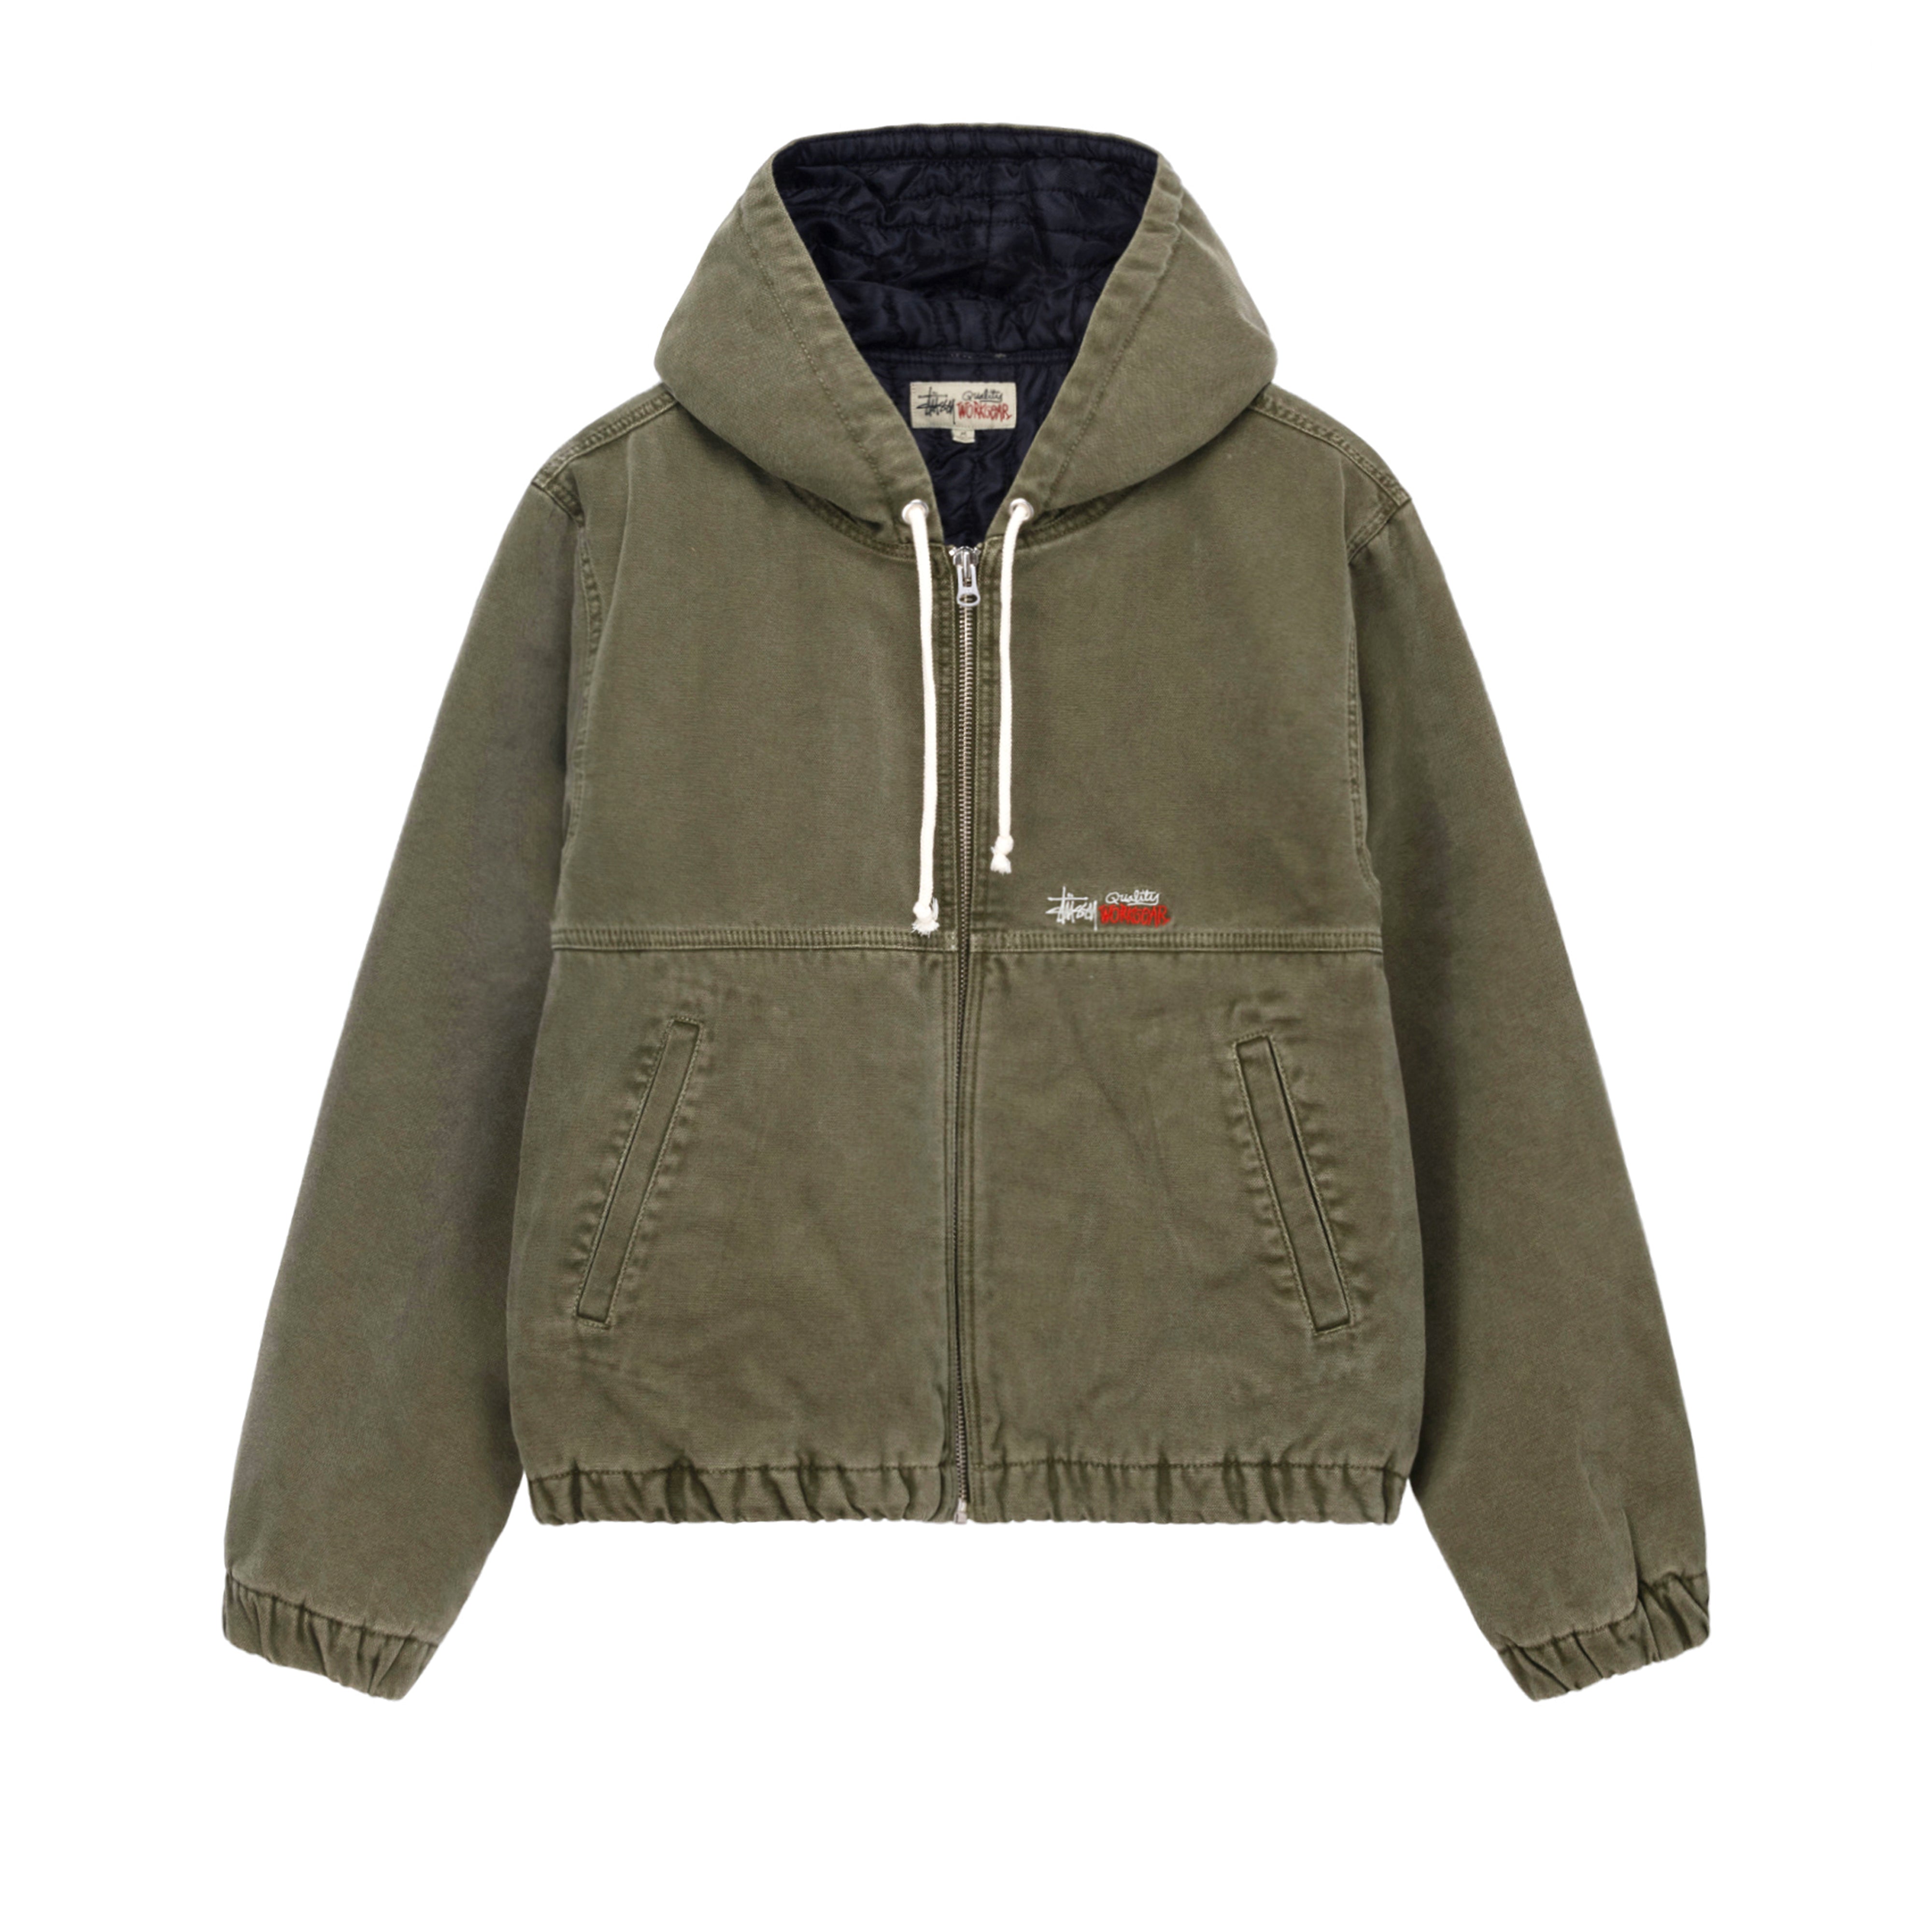 Stüssy - Men's Work Jacket Insulated Canvas - (Olive Drab)